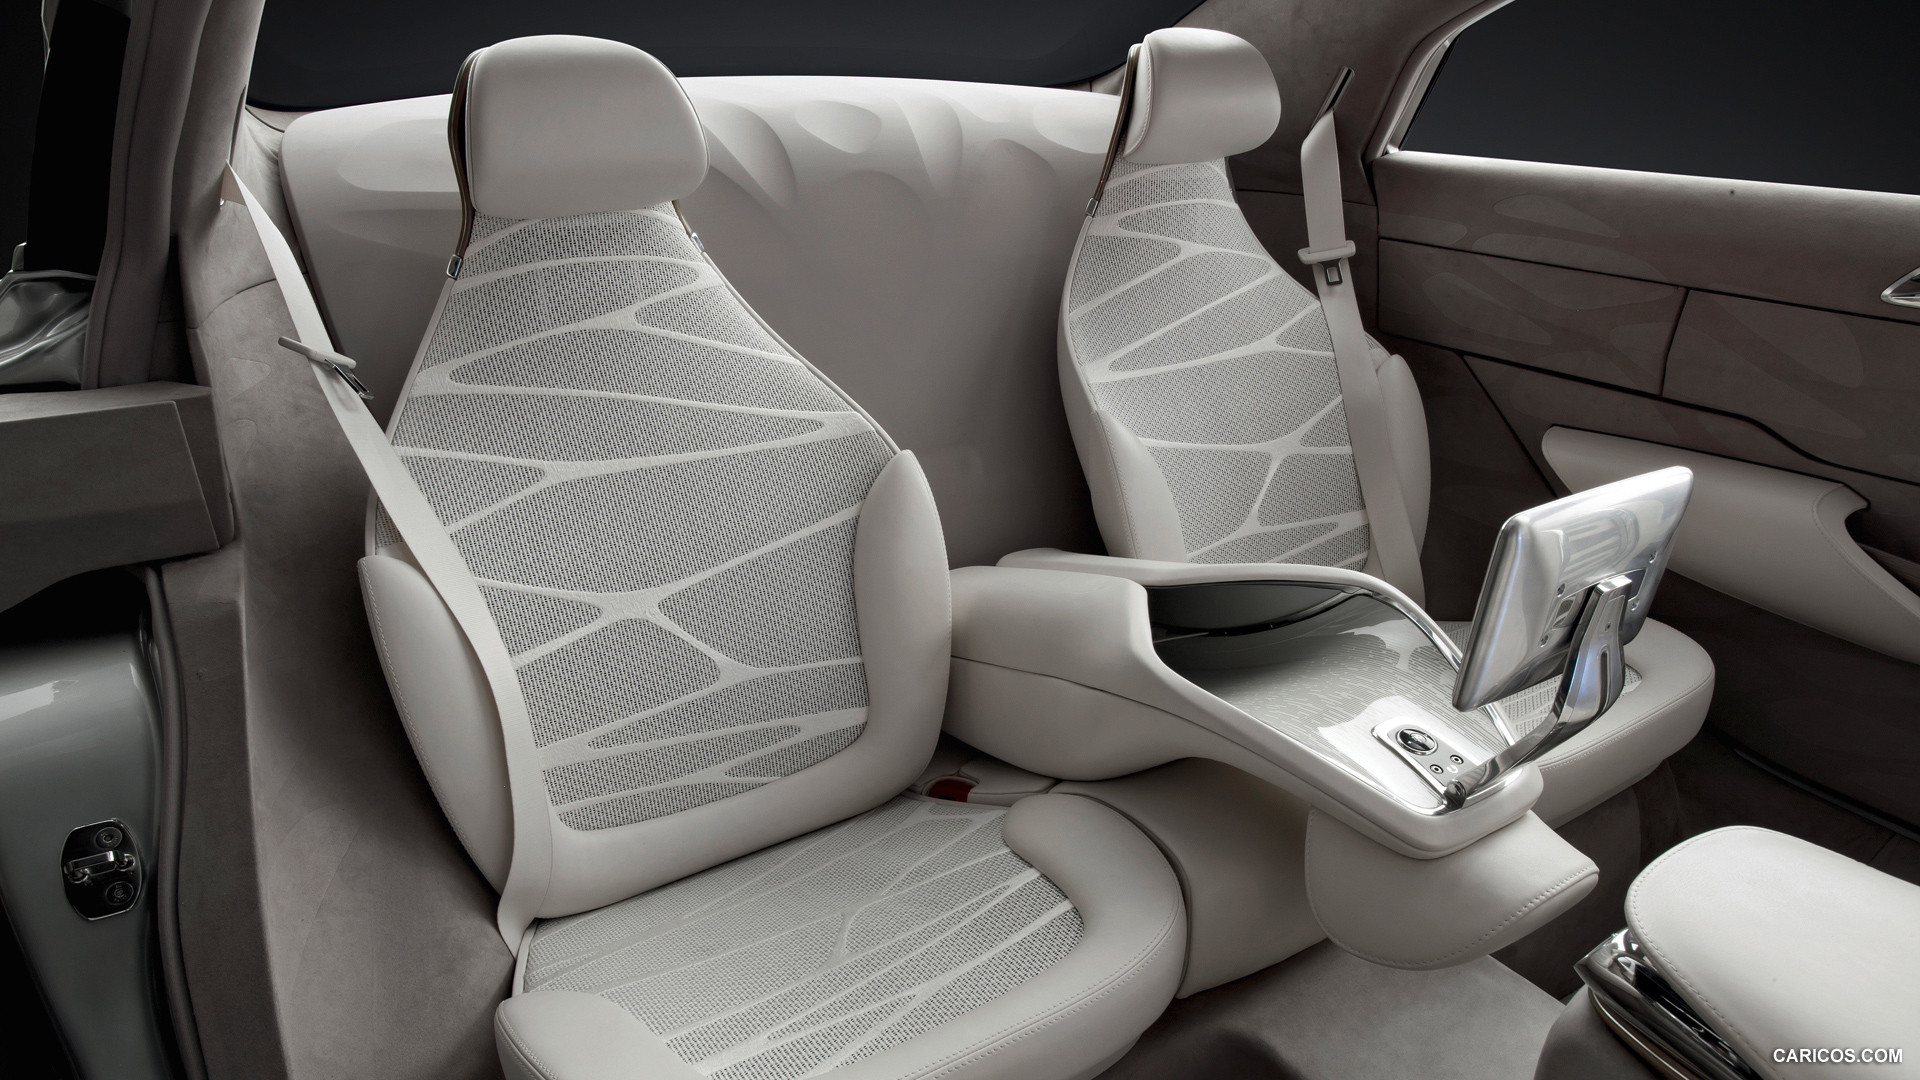 Mercedes-Benz F800 Style Concept (2010)  - Interior, Rear Seats, #49 of 120